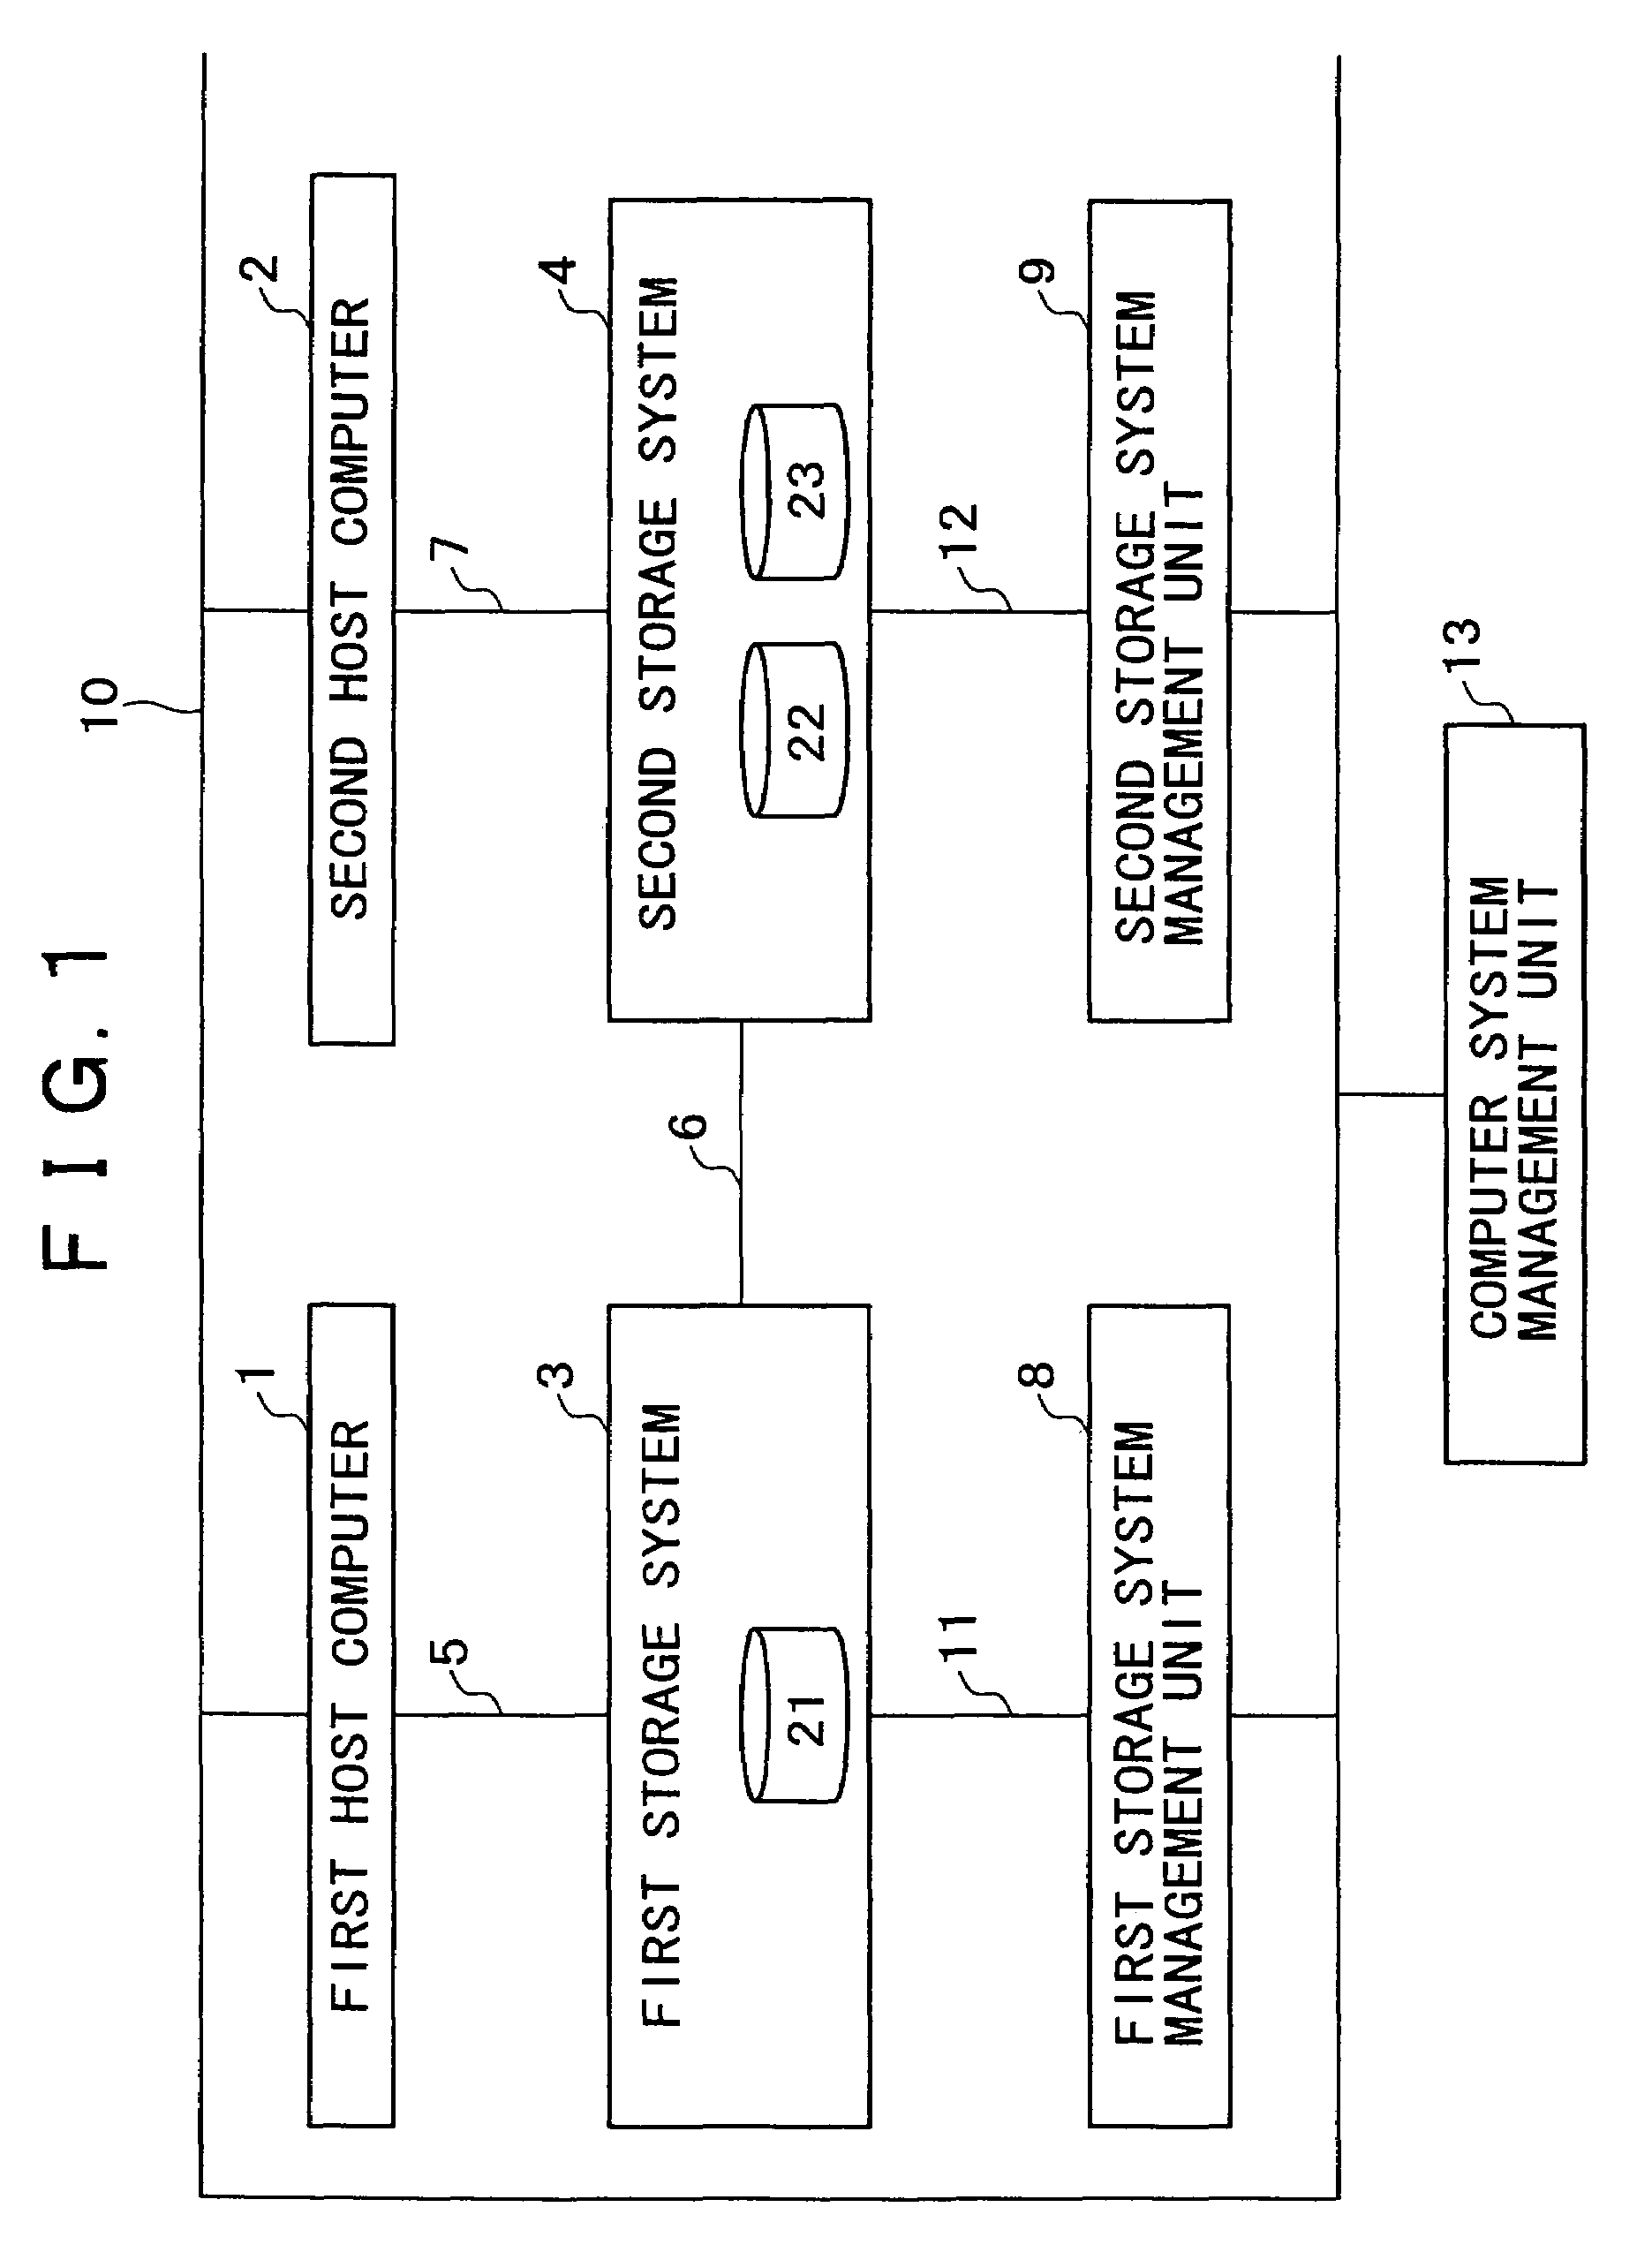 Backup copying and restoration processing in a storage subsystem